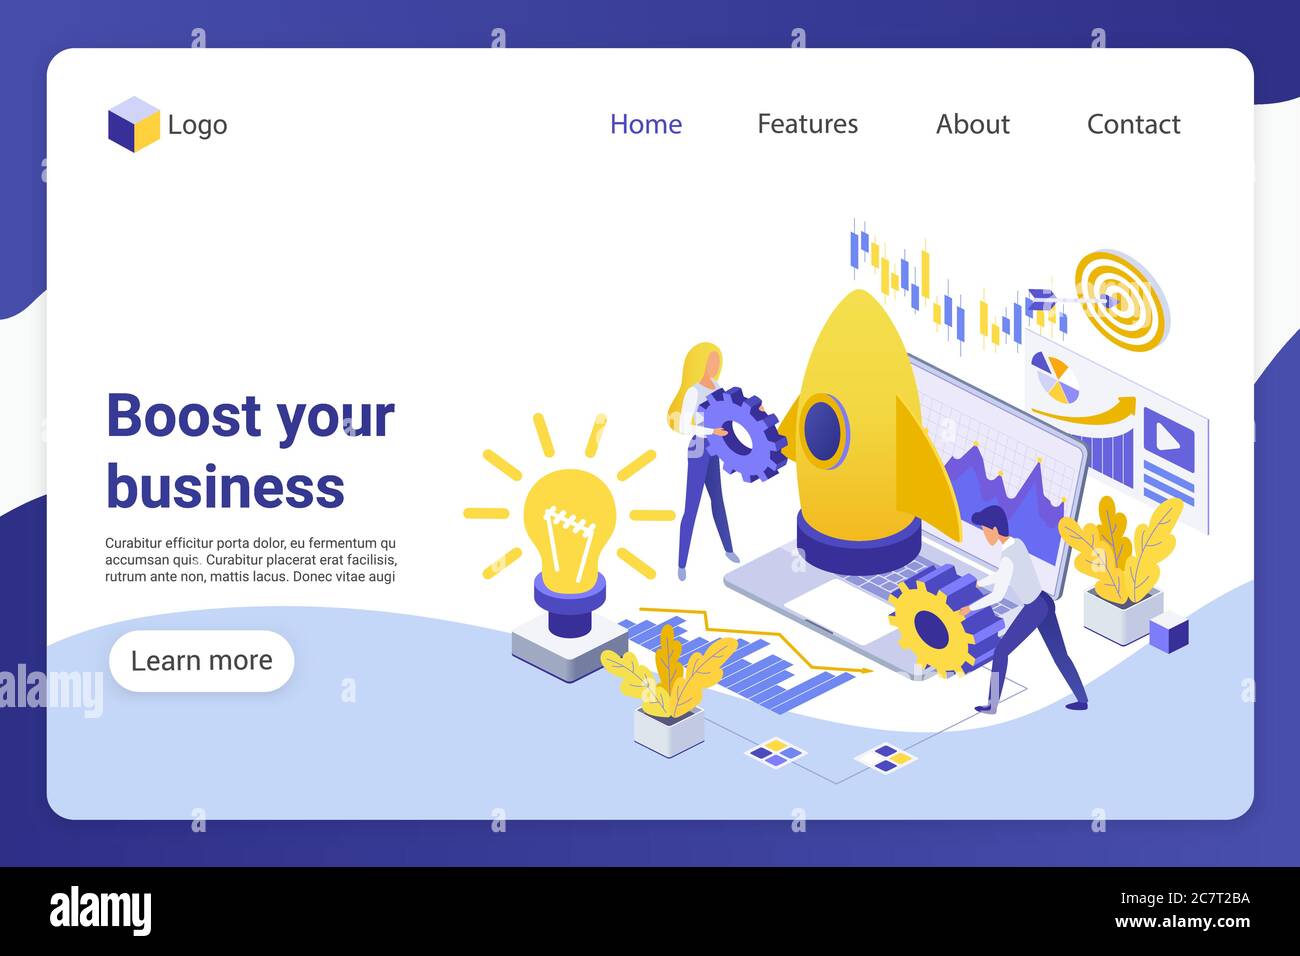 Business boost isometric landing page vector template. Businesspeople, male and female entrepreneurs faceless characters. Project development, company promotion web banner homepage design layout Stock Vector